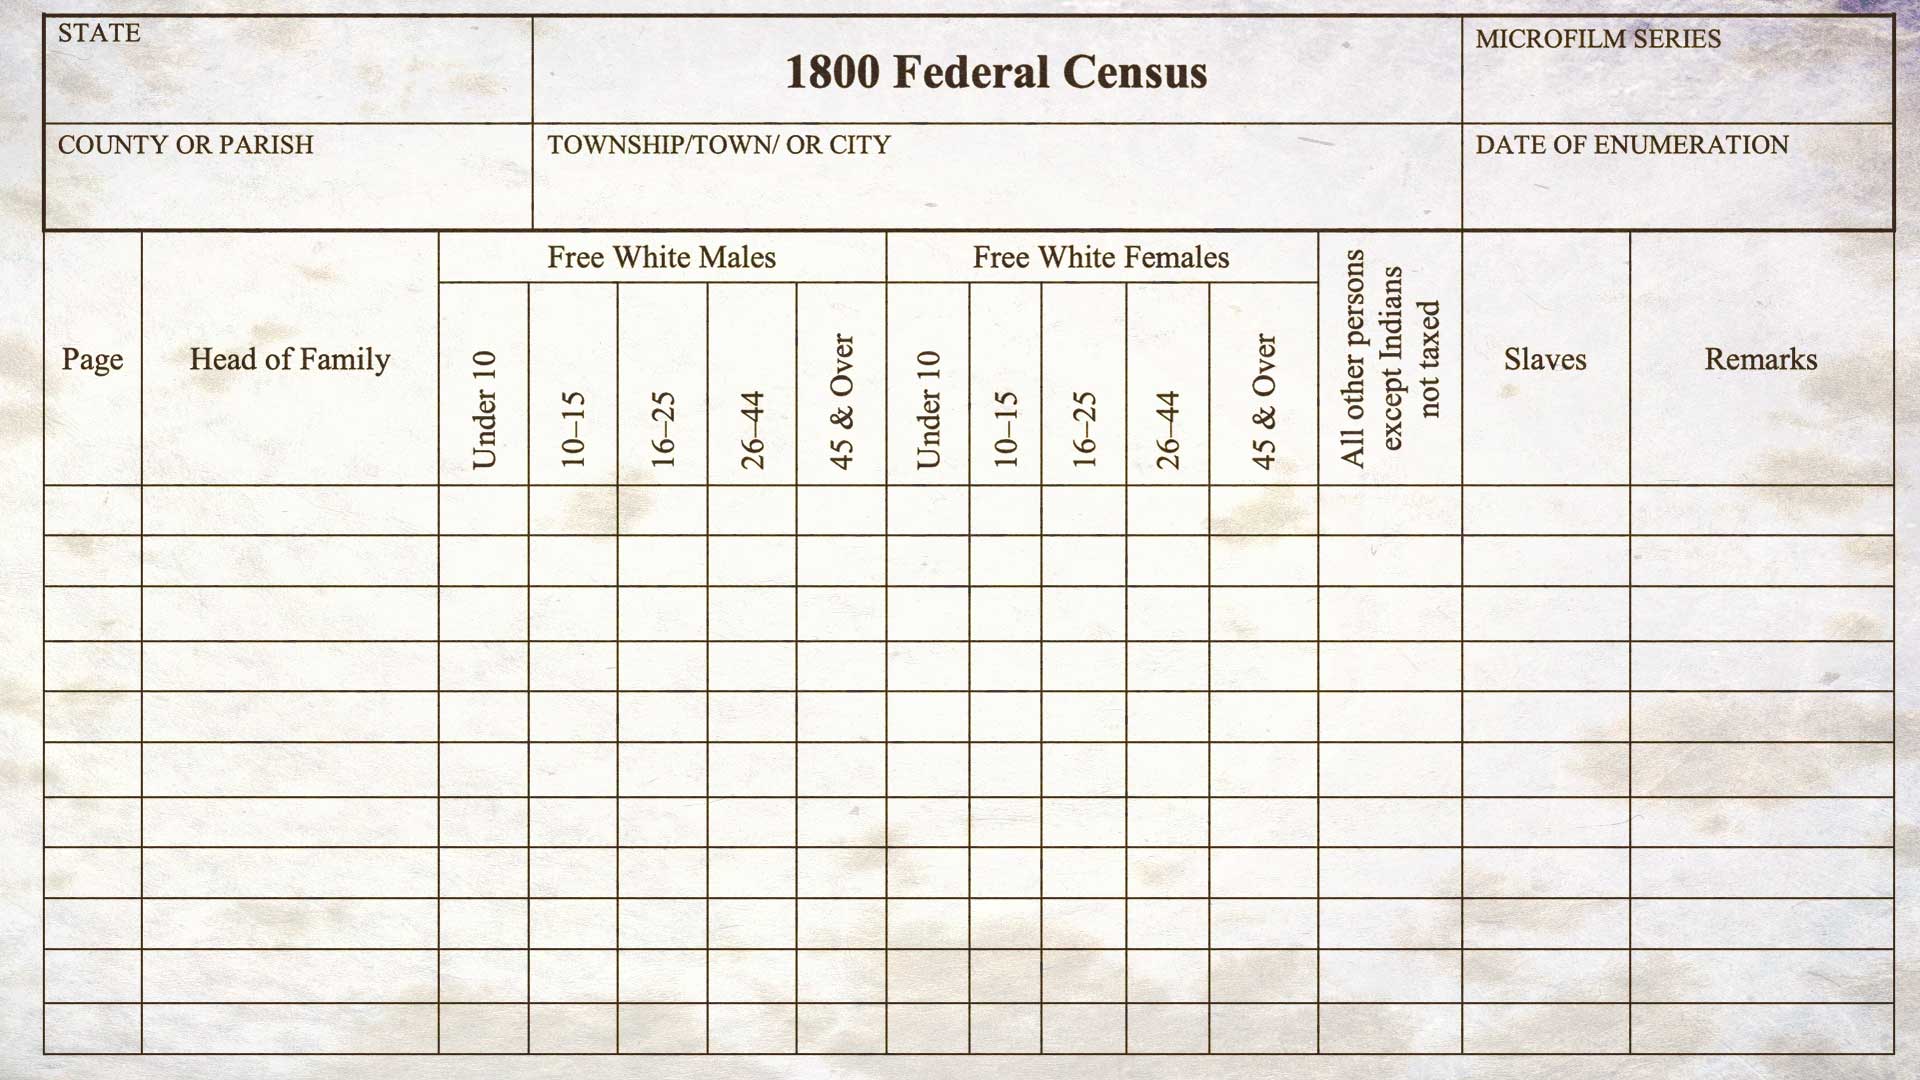 A Closer Look at the 1800 US Federal Census